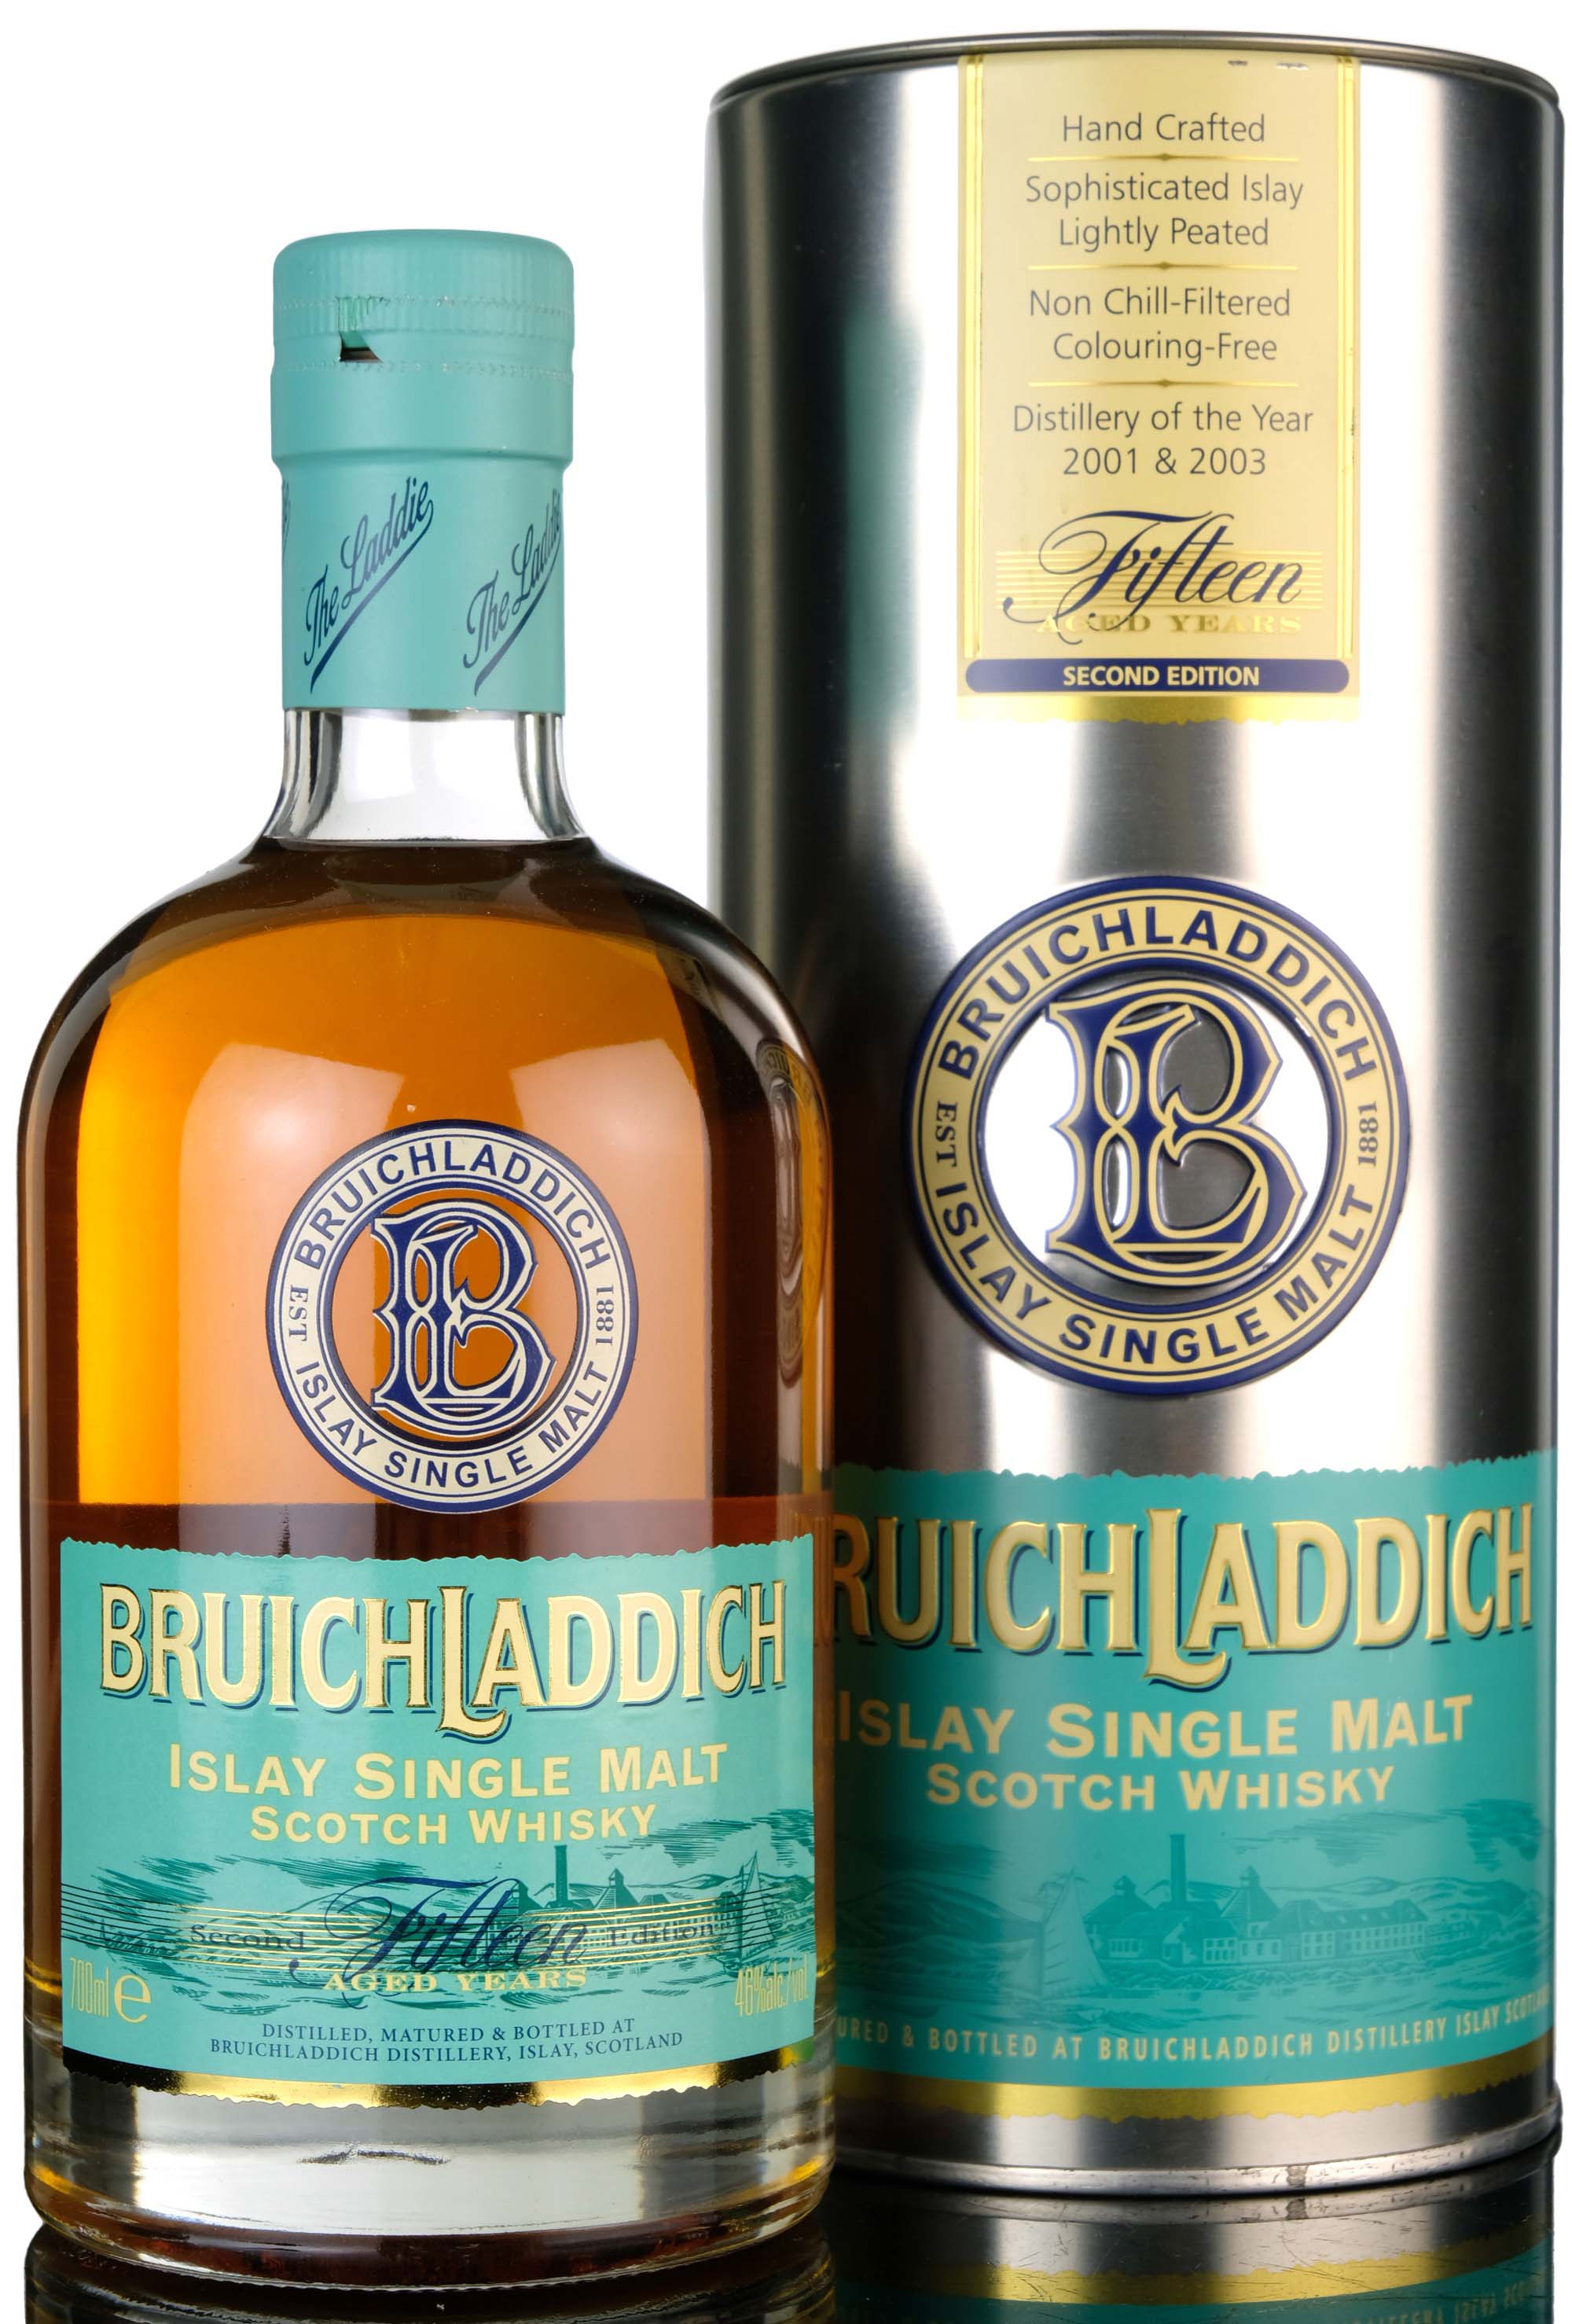 Bruichladdich 15 Year Old - 2nd Edition - 2007 Release